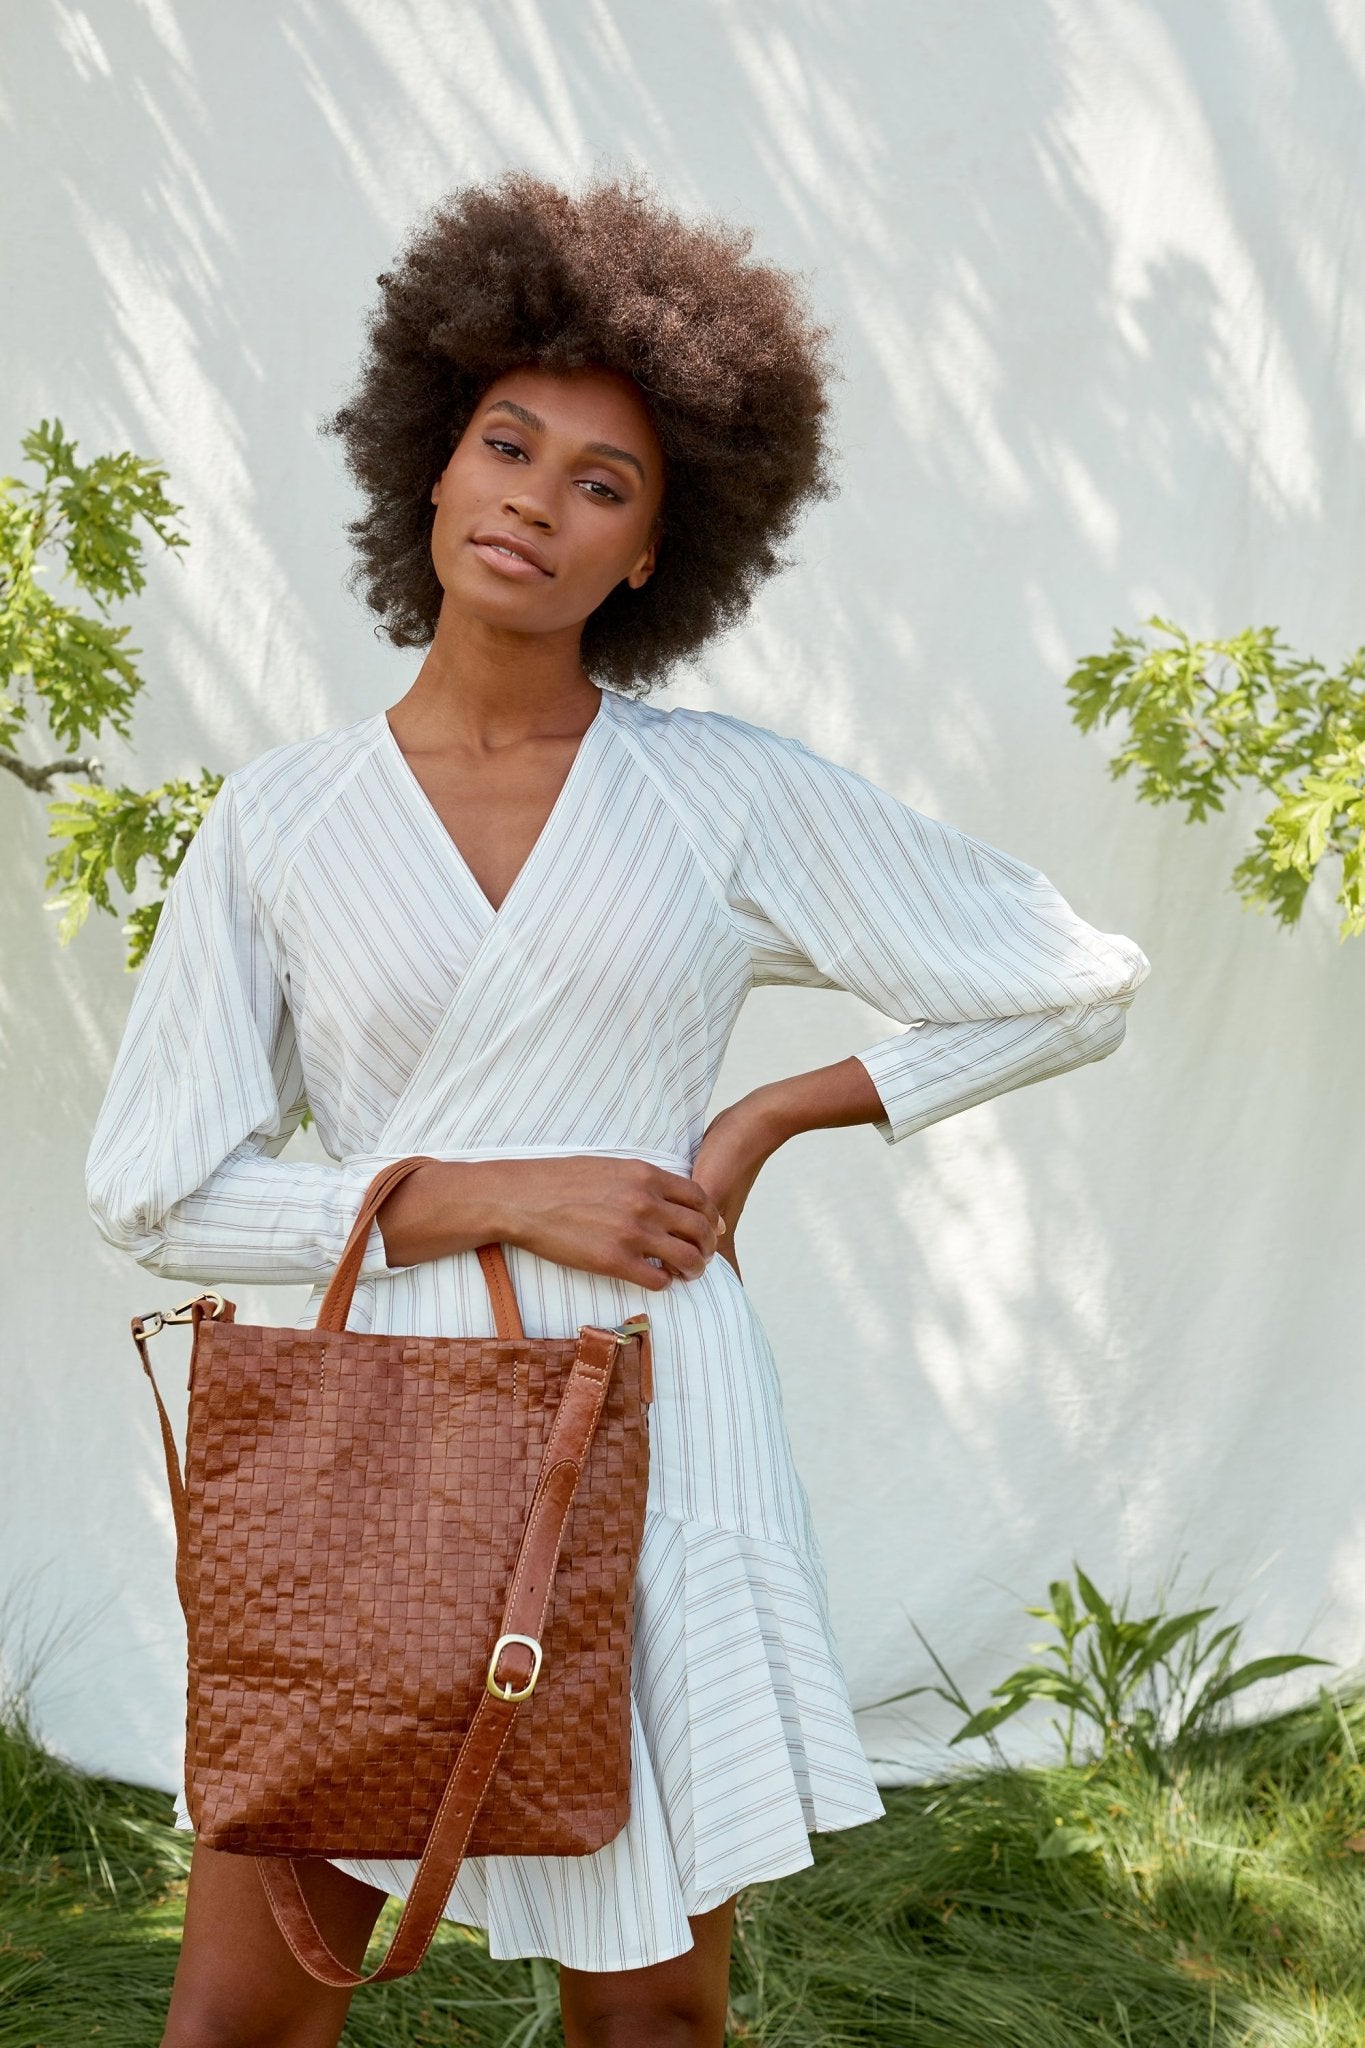 A woman is shown outdoors amidst foliage, in front of a linen backdrop. She wears a white dress and carries a brown woven washable paper tote bag over one arm.